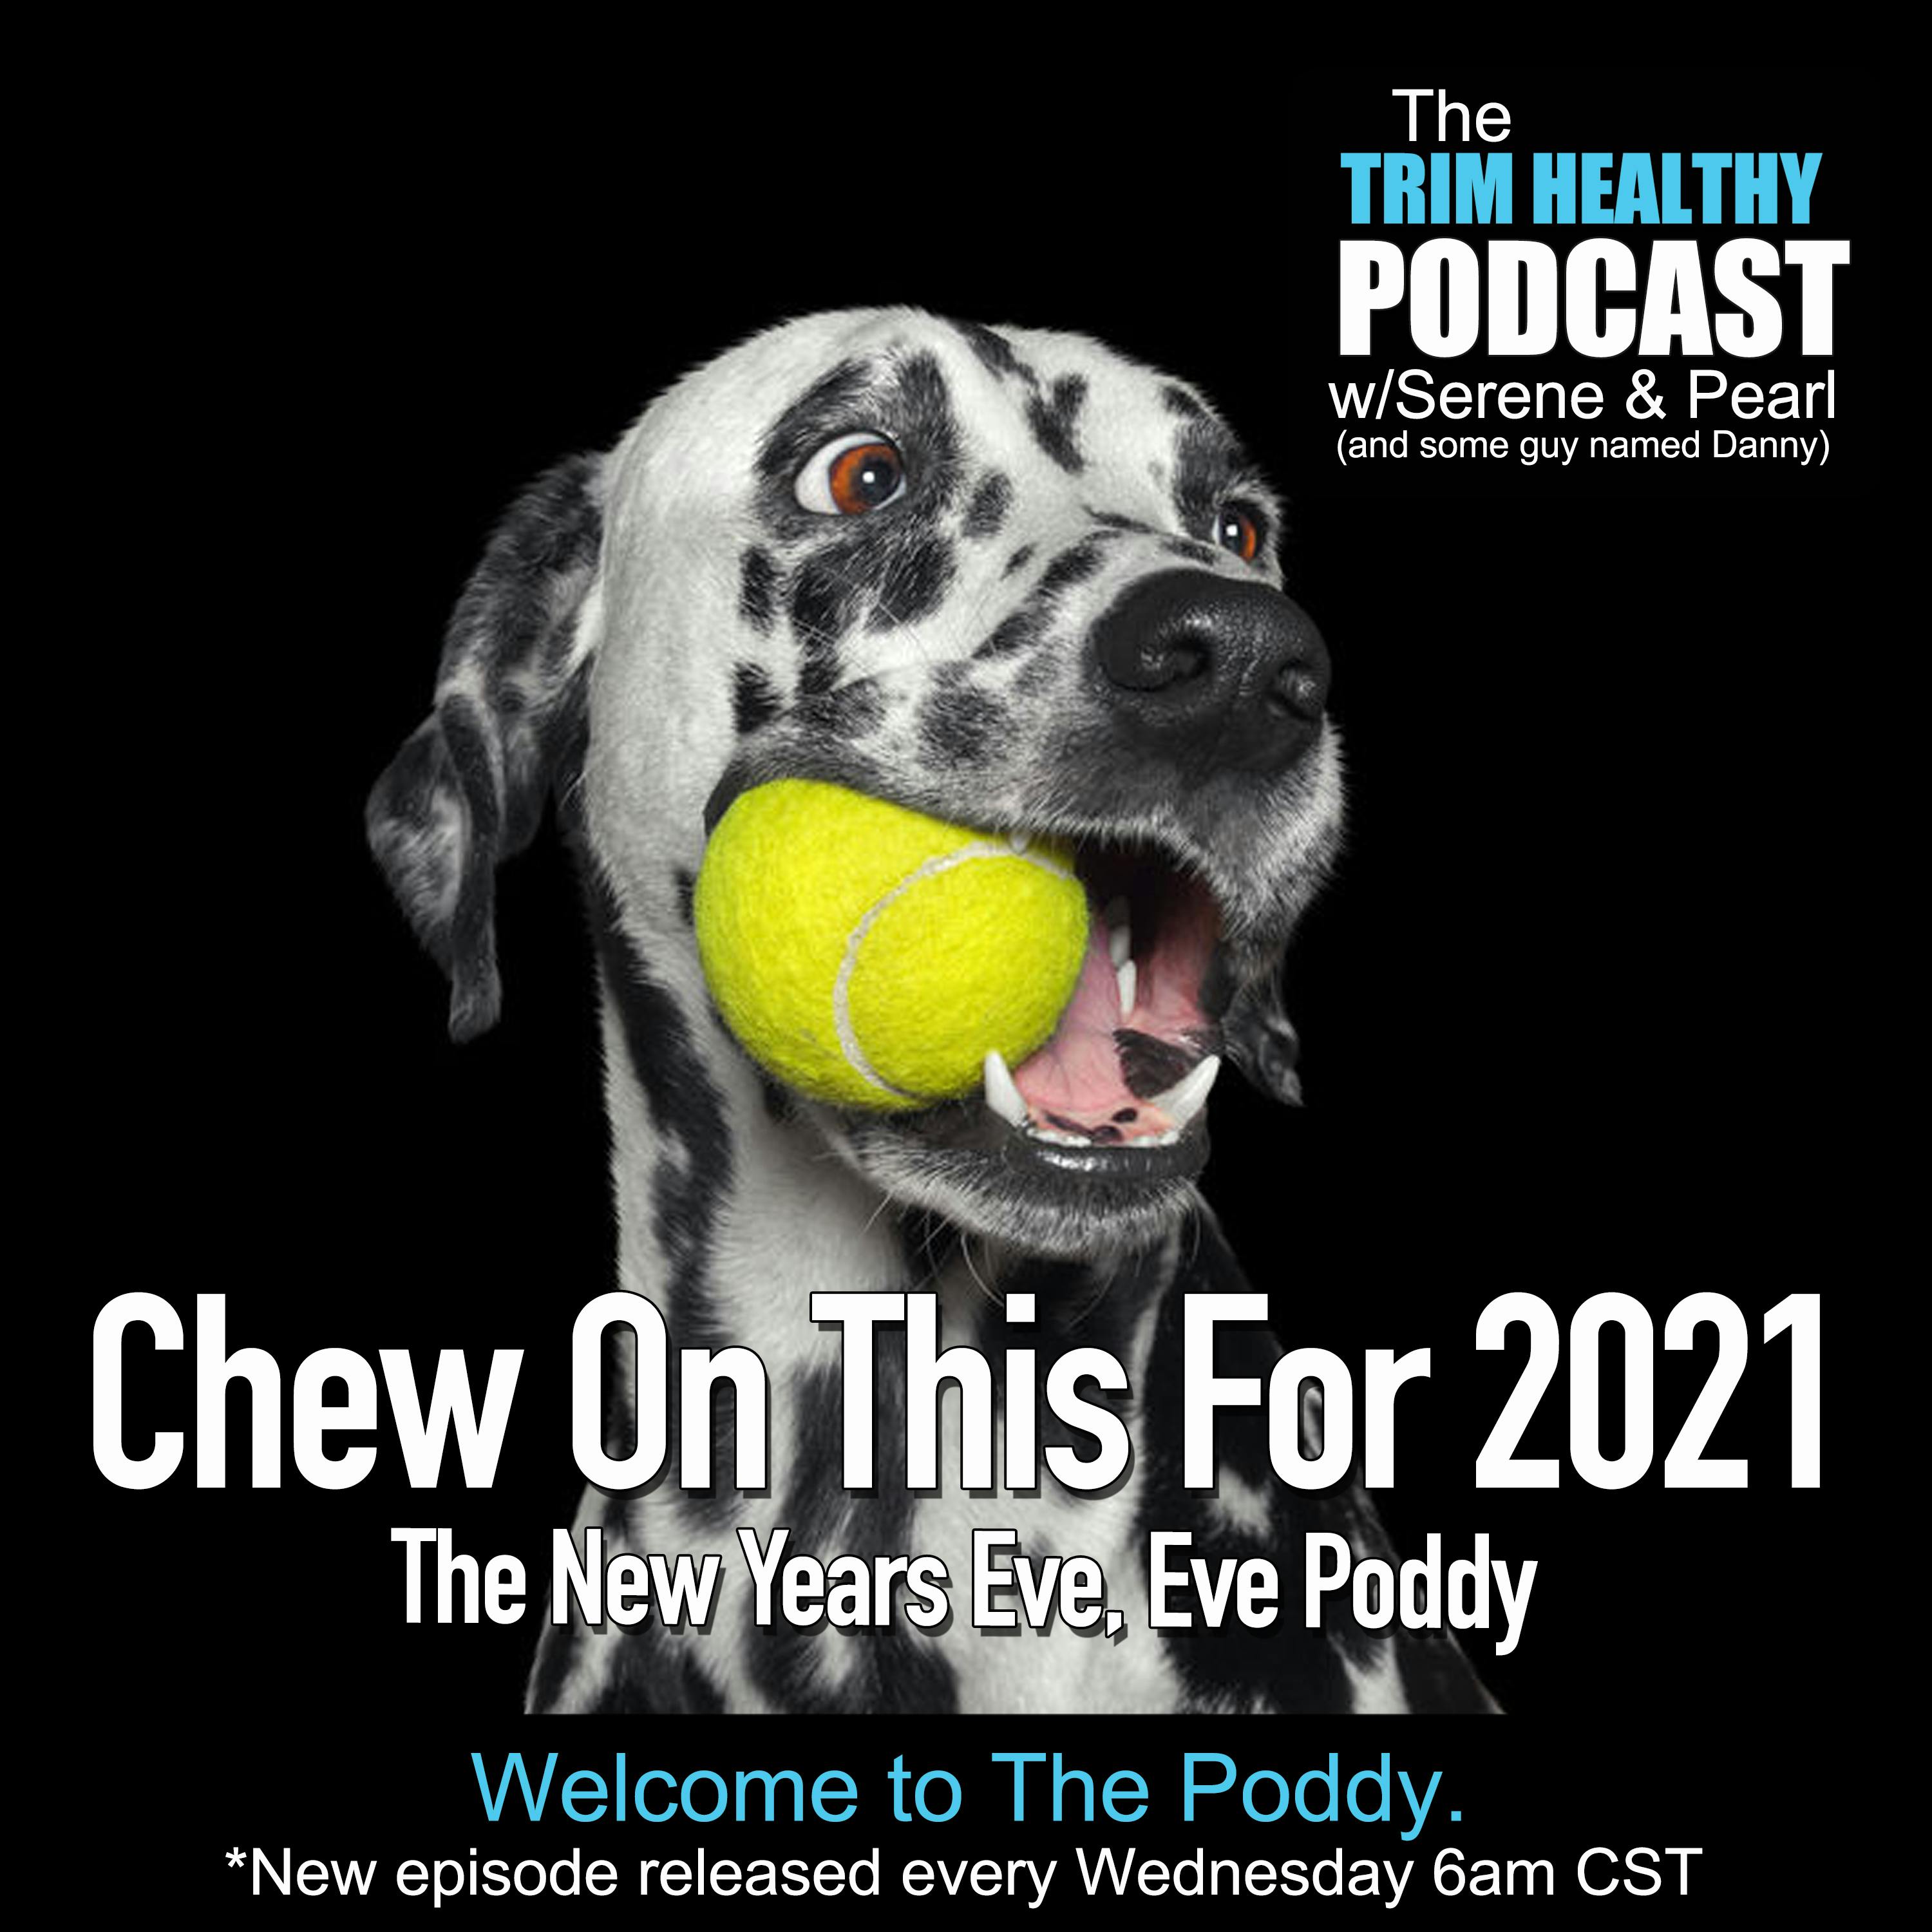 Ep 205: Chew On This For 2021 (the New Year’s Eve, Eve Poddy)